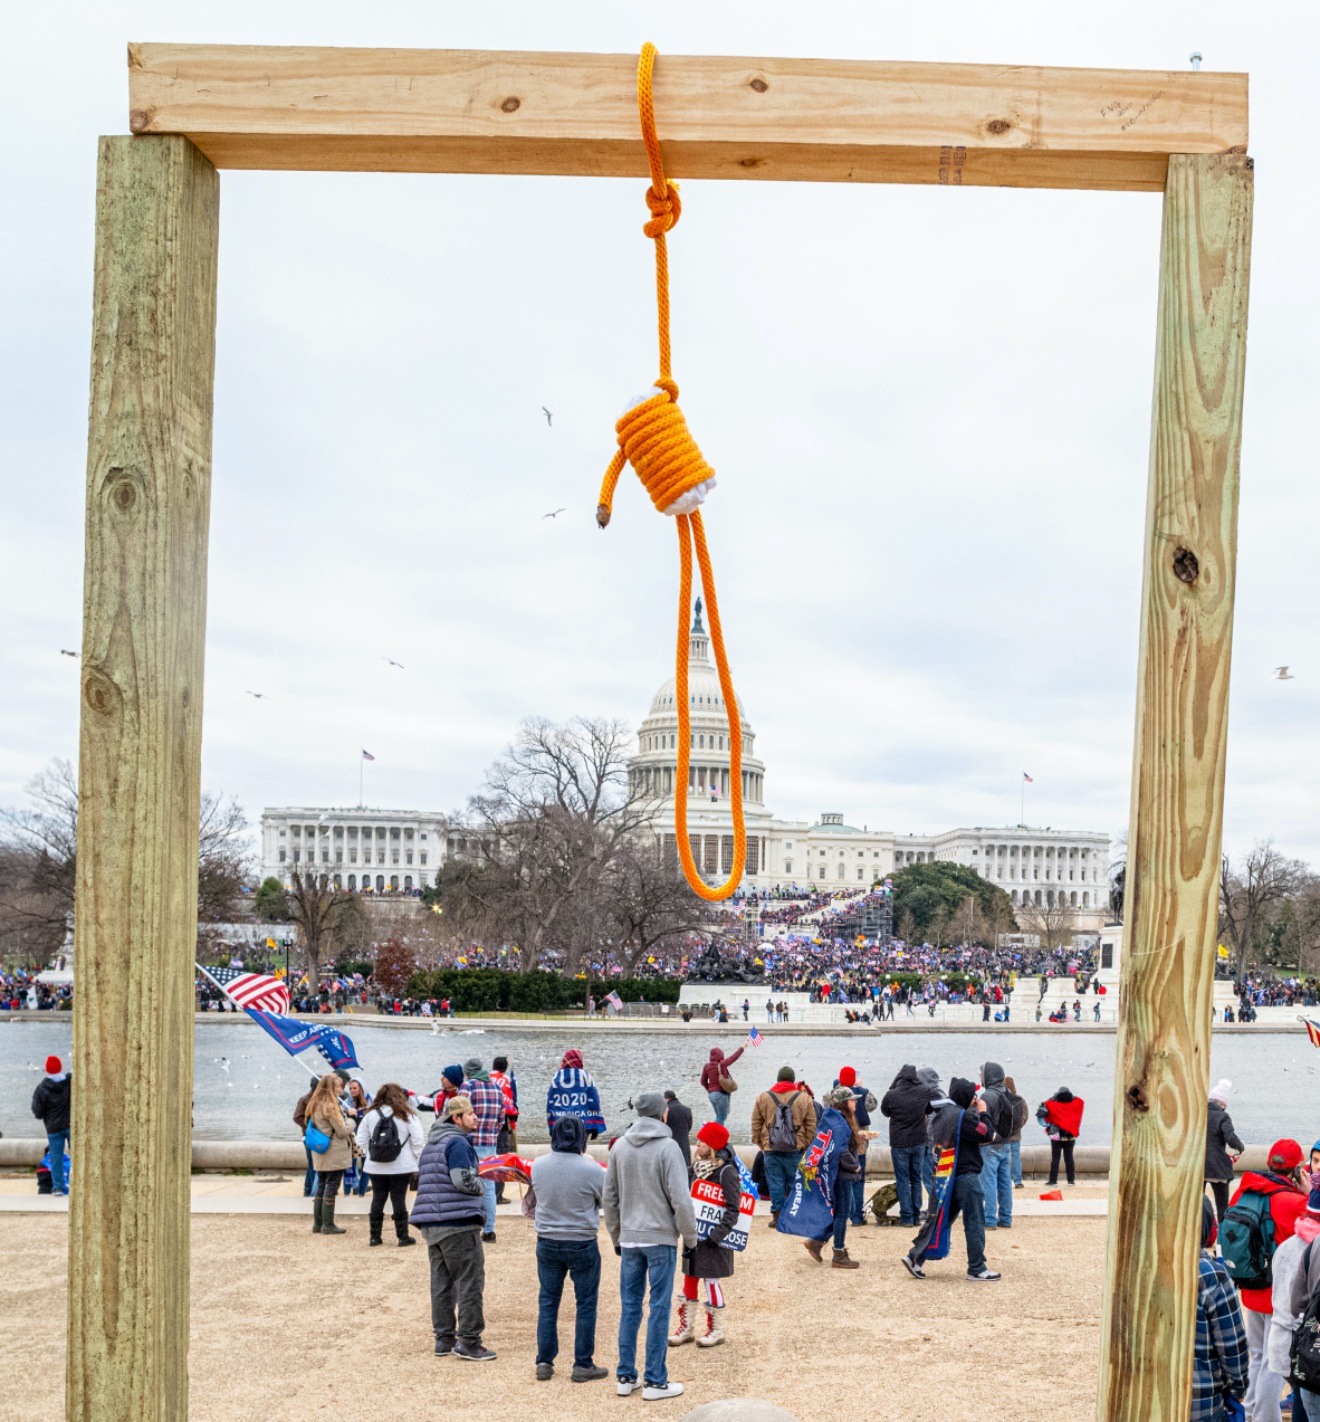 A noose and gallows outside the Capitol